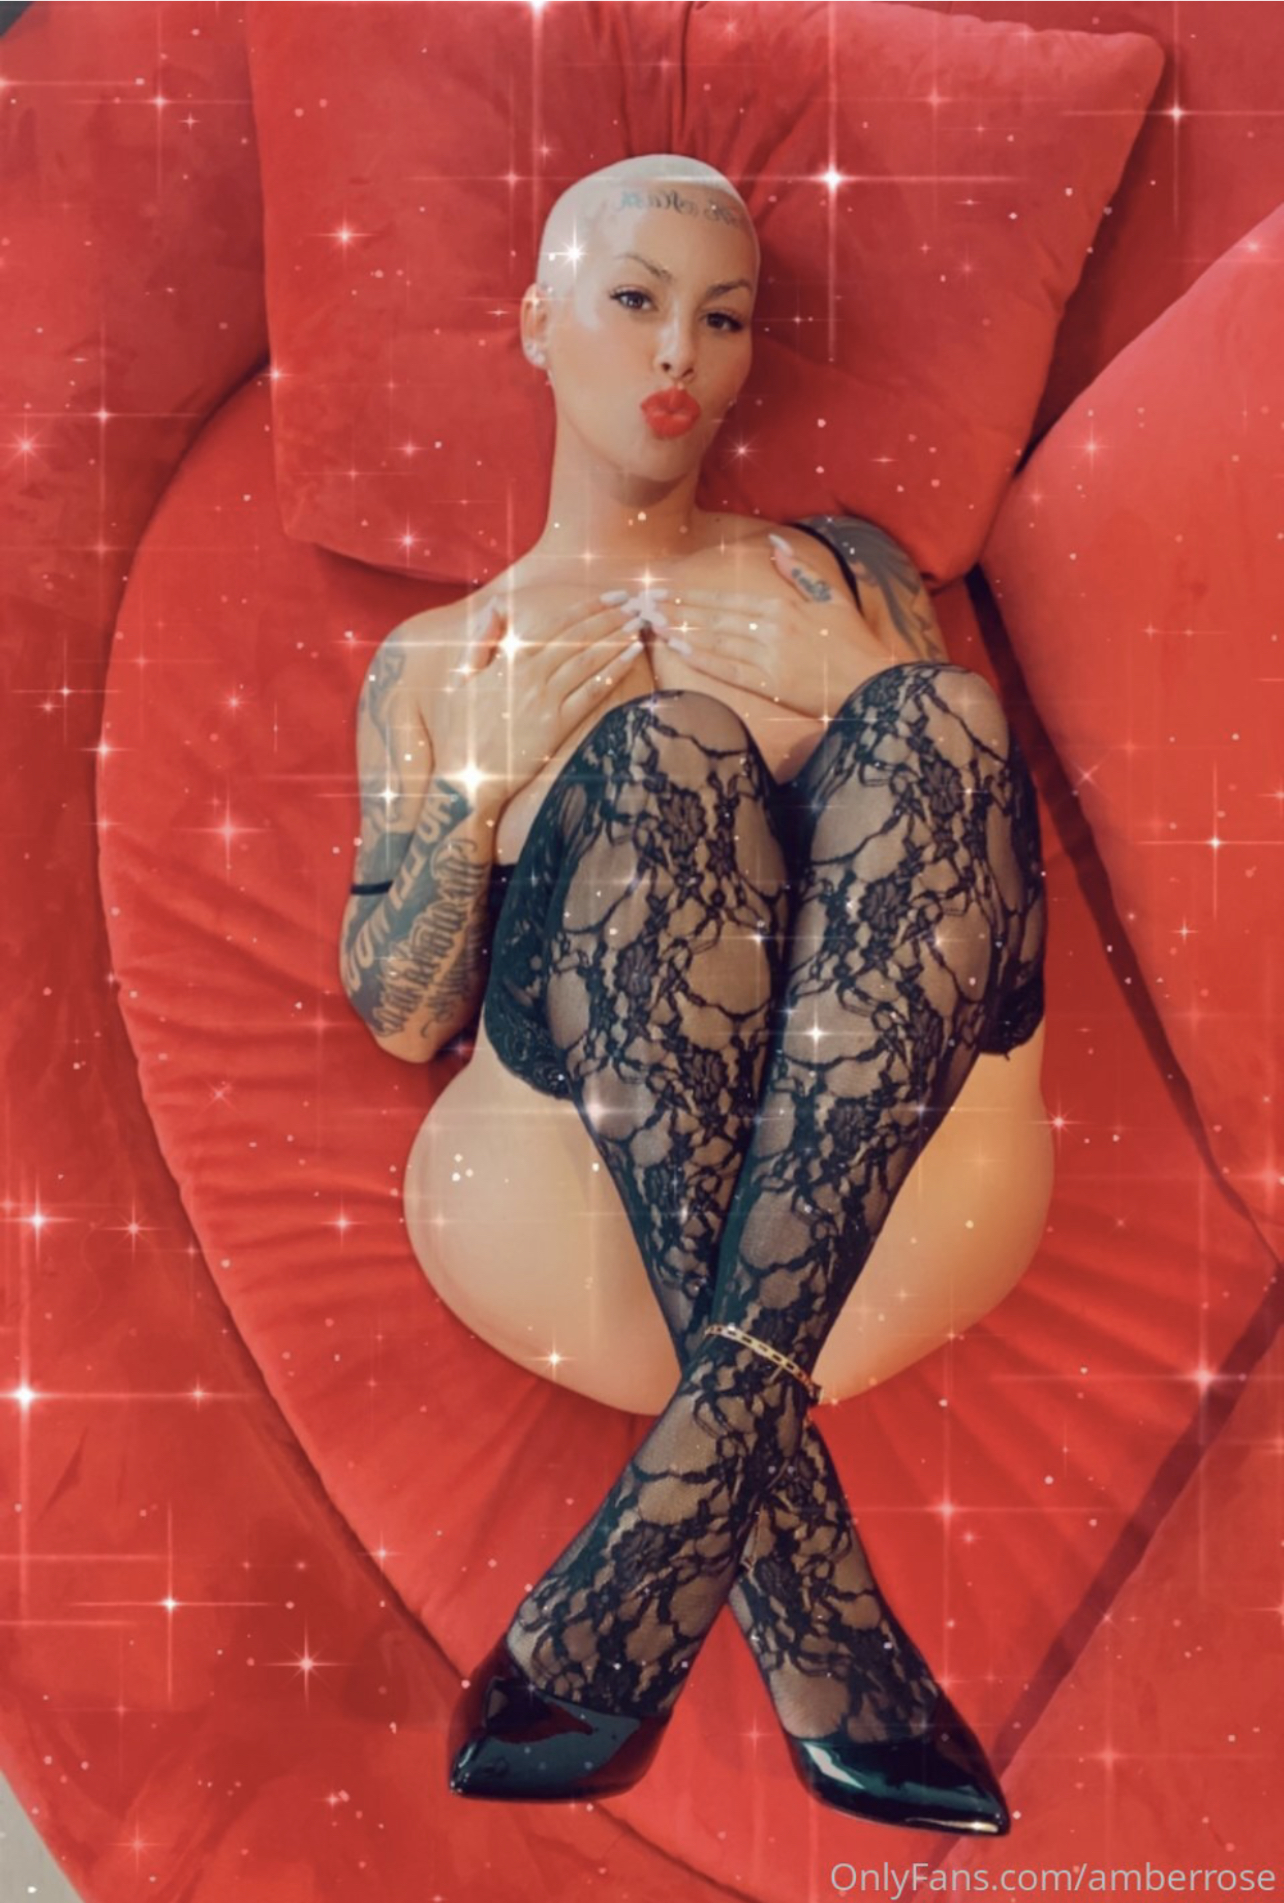 Photos onlyfans amber rose 